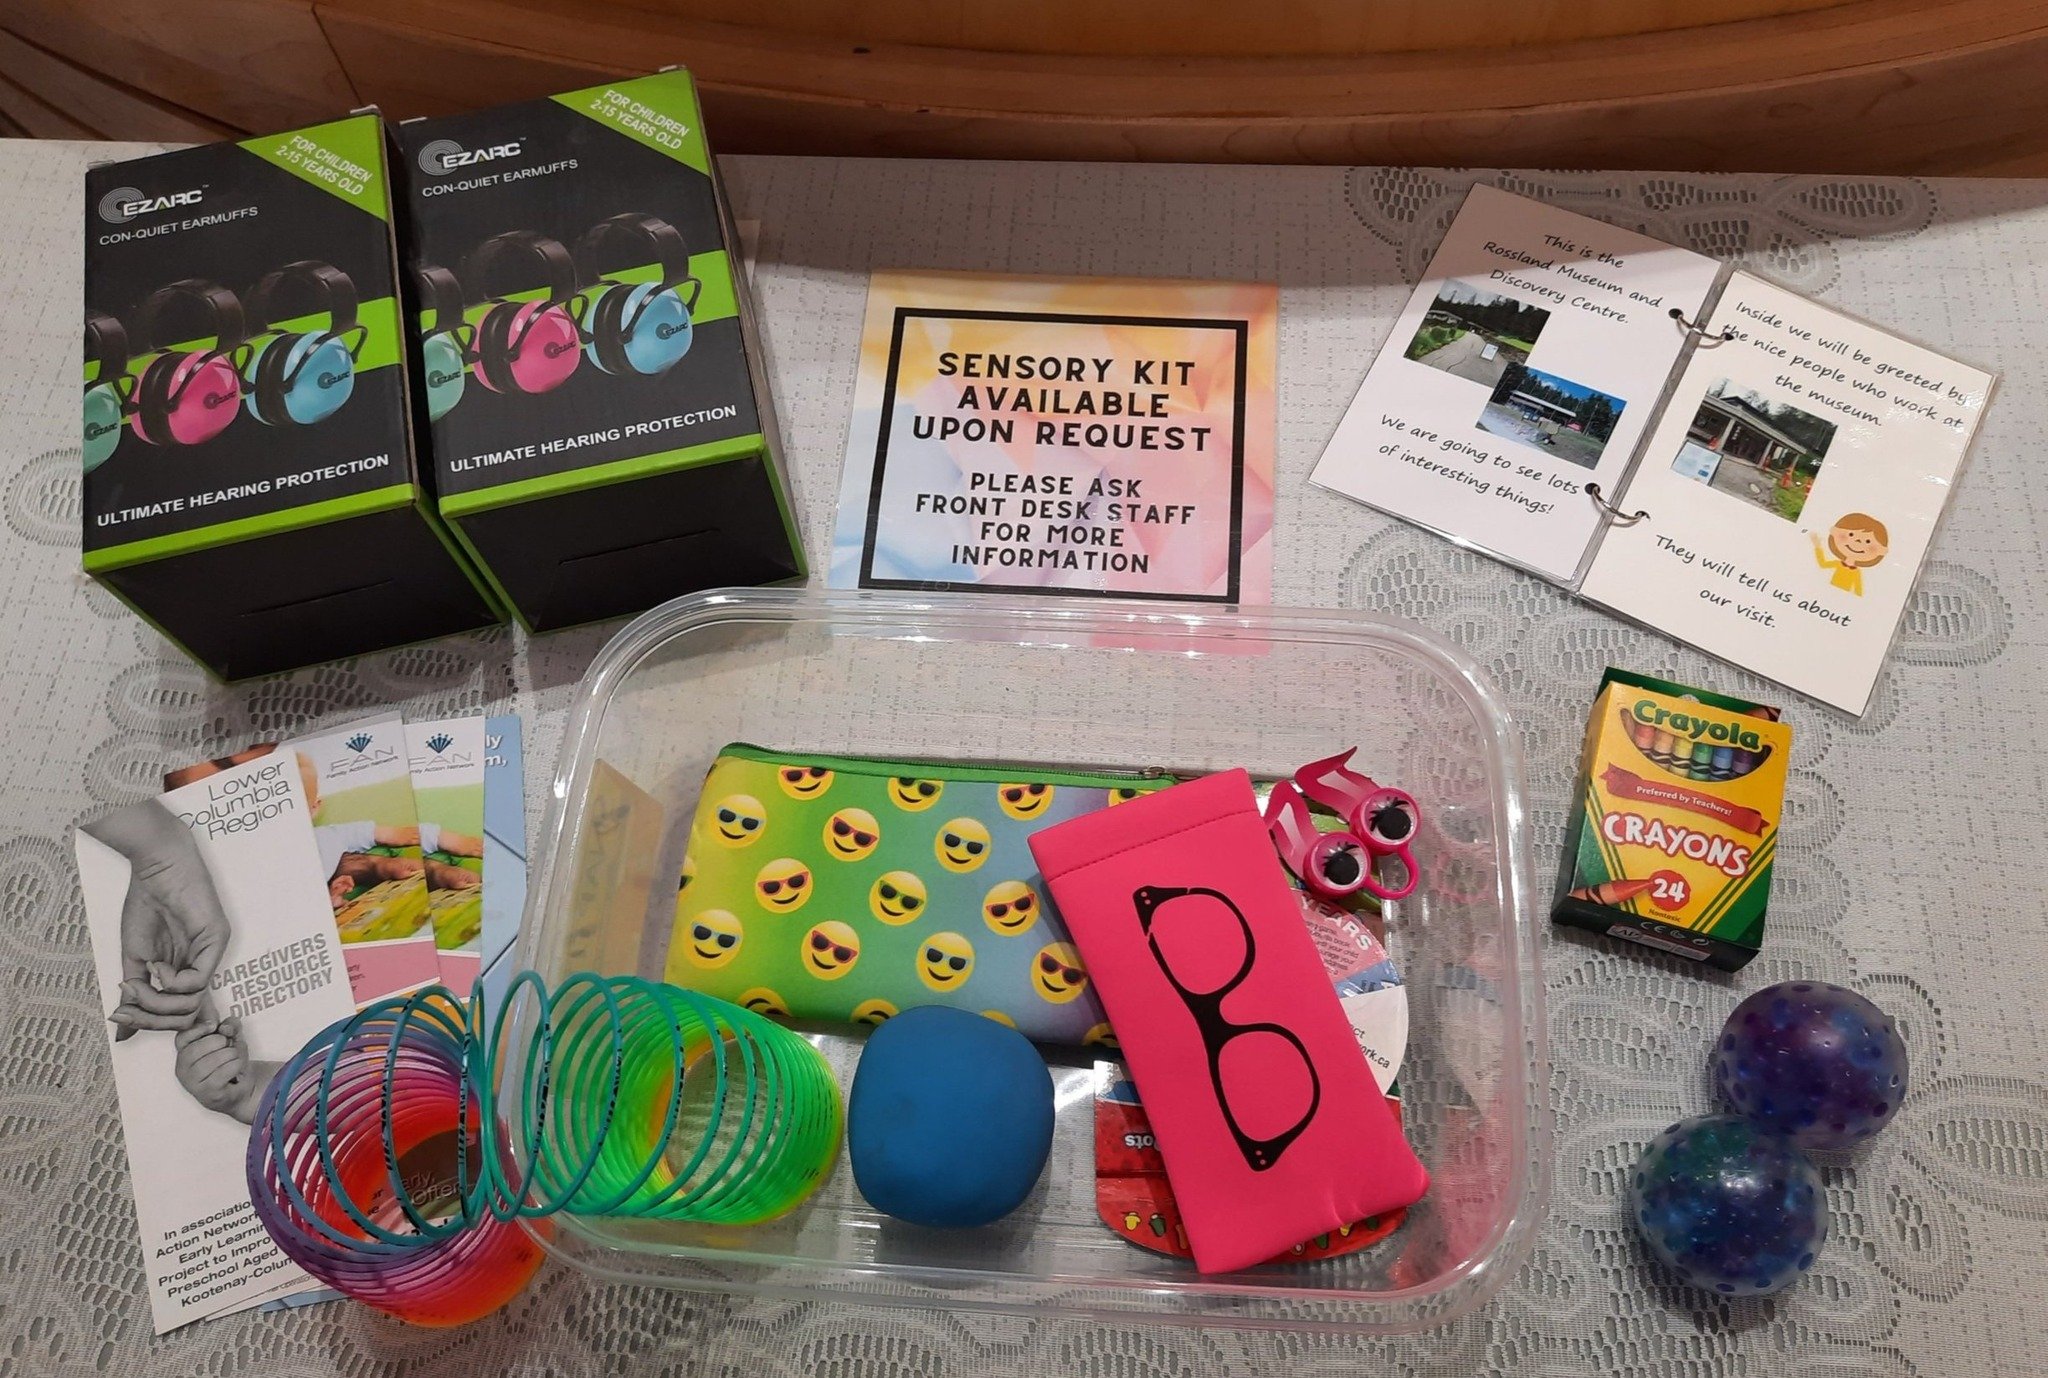 Have you heard about our sensory bins? We have two sensory bins available to help enhance the museum experience for young visitors with diverse needs. These bins, sponsored by the @the_family_action_network and @kootenayfamilyplace, include a social 